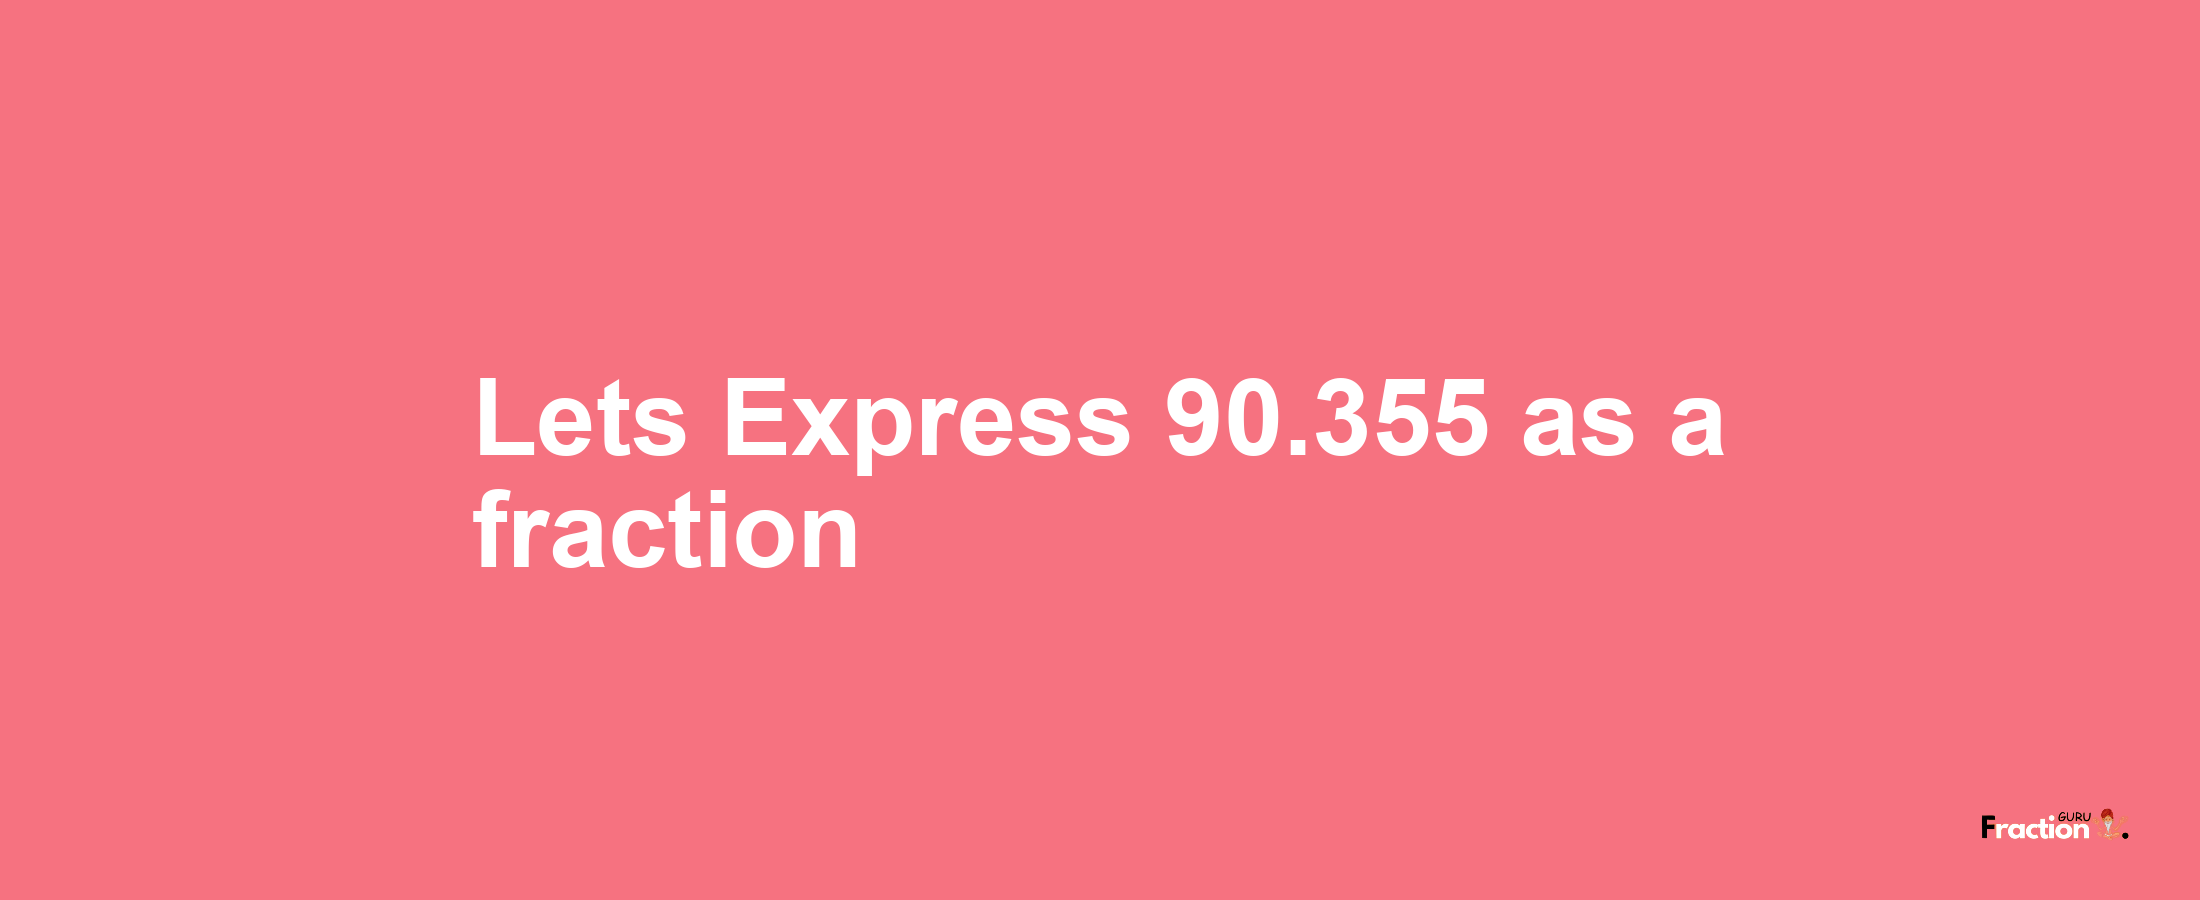 Lets Express 90.355 as afraction